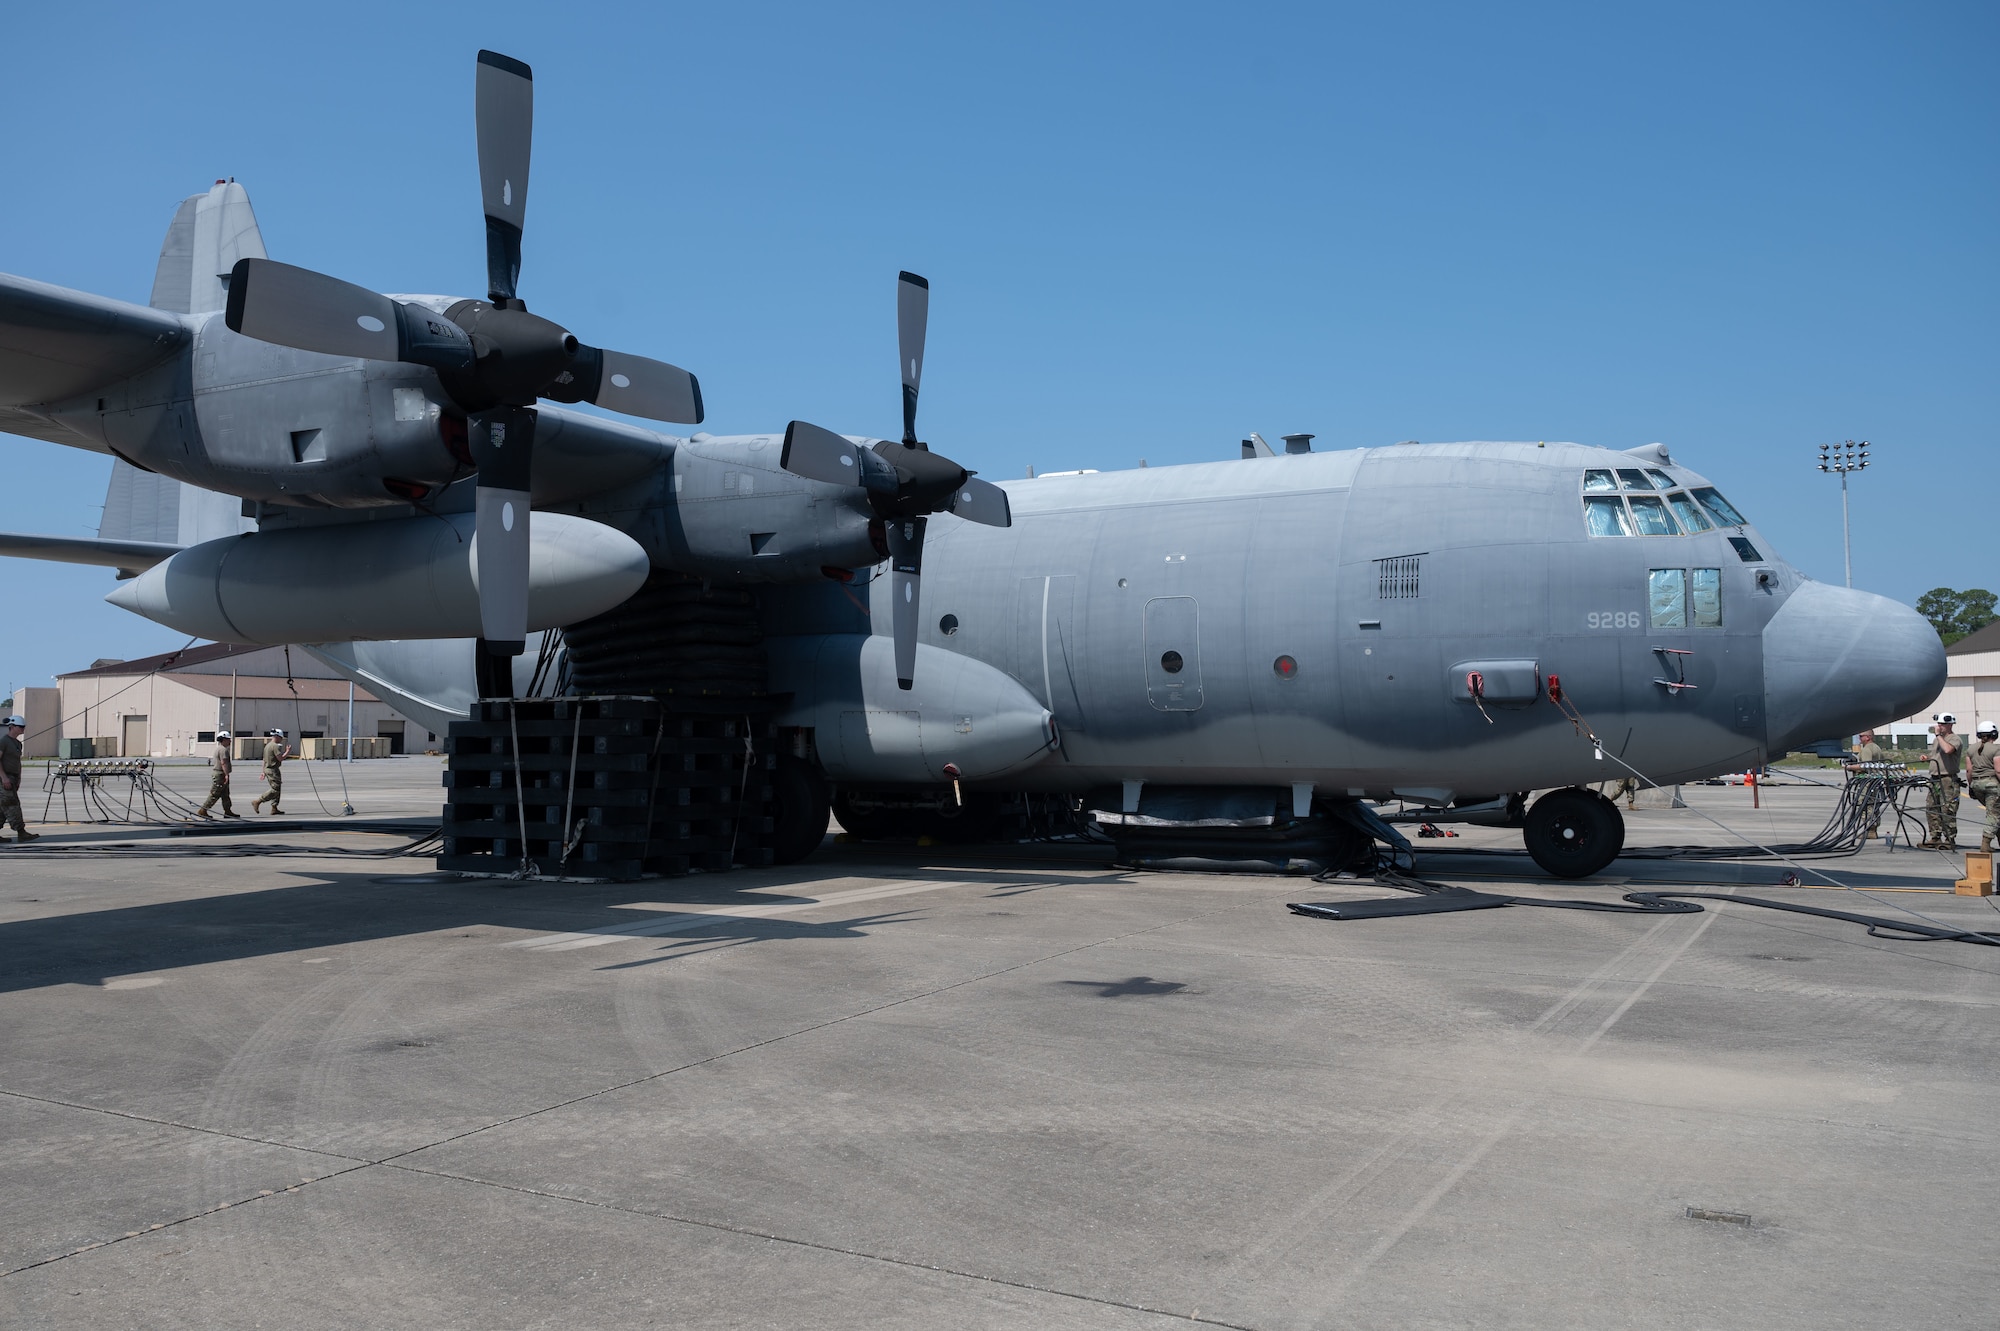 Airmen from Pennsylvania Air National Guard’s 193rd Special Operations Wing partner with the 1st Special Operations Maintenance Squadron to participate in a joint training exercise to lift an MC-130H on May 17, 2022, at Hurlburt Field, Florida.